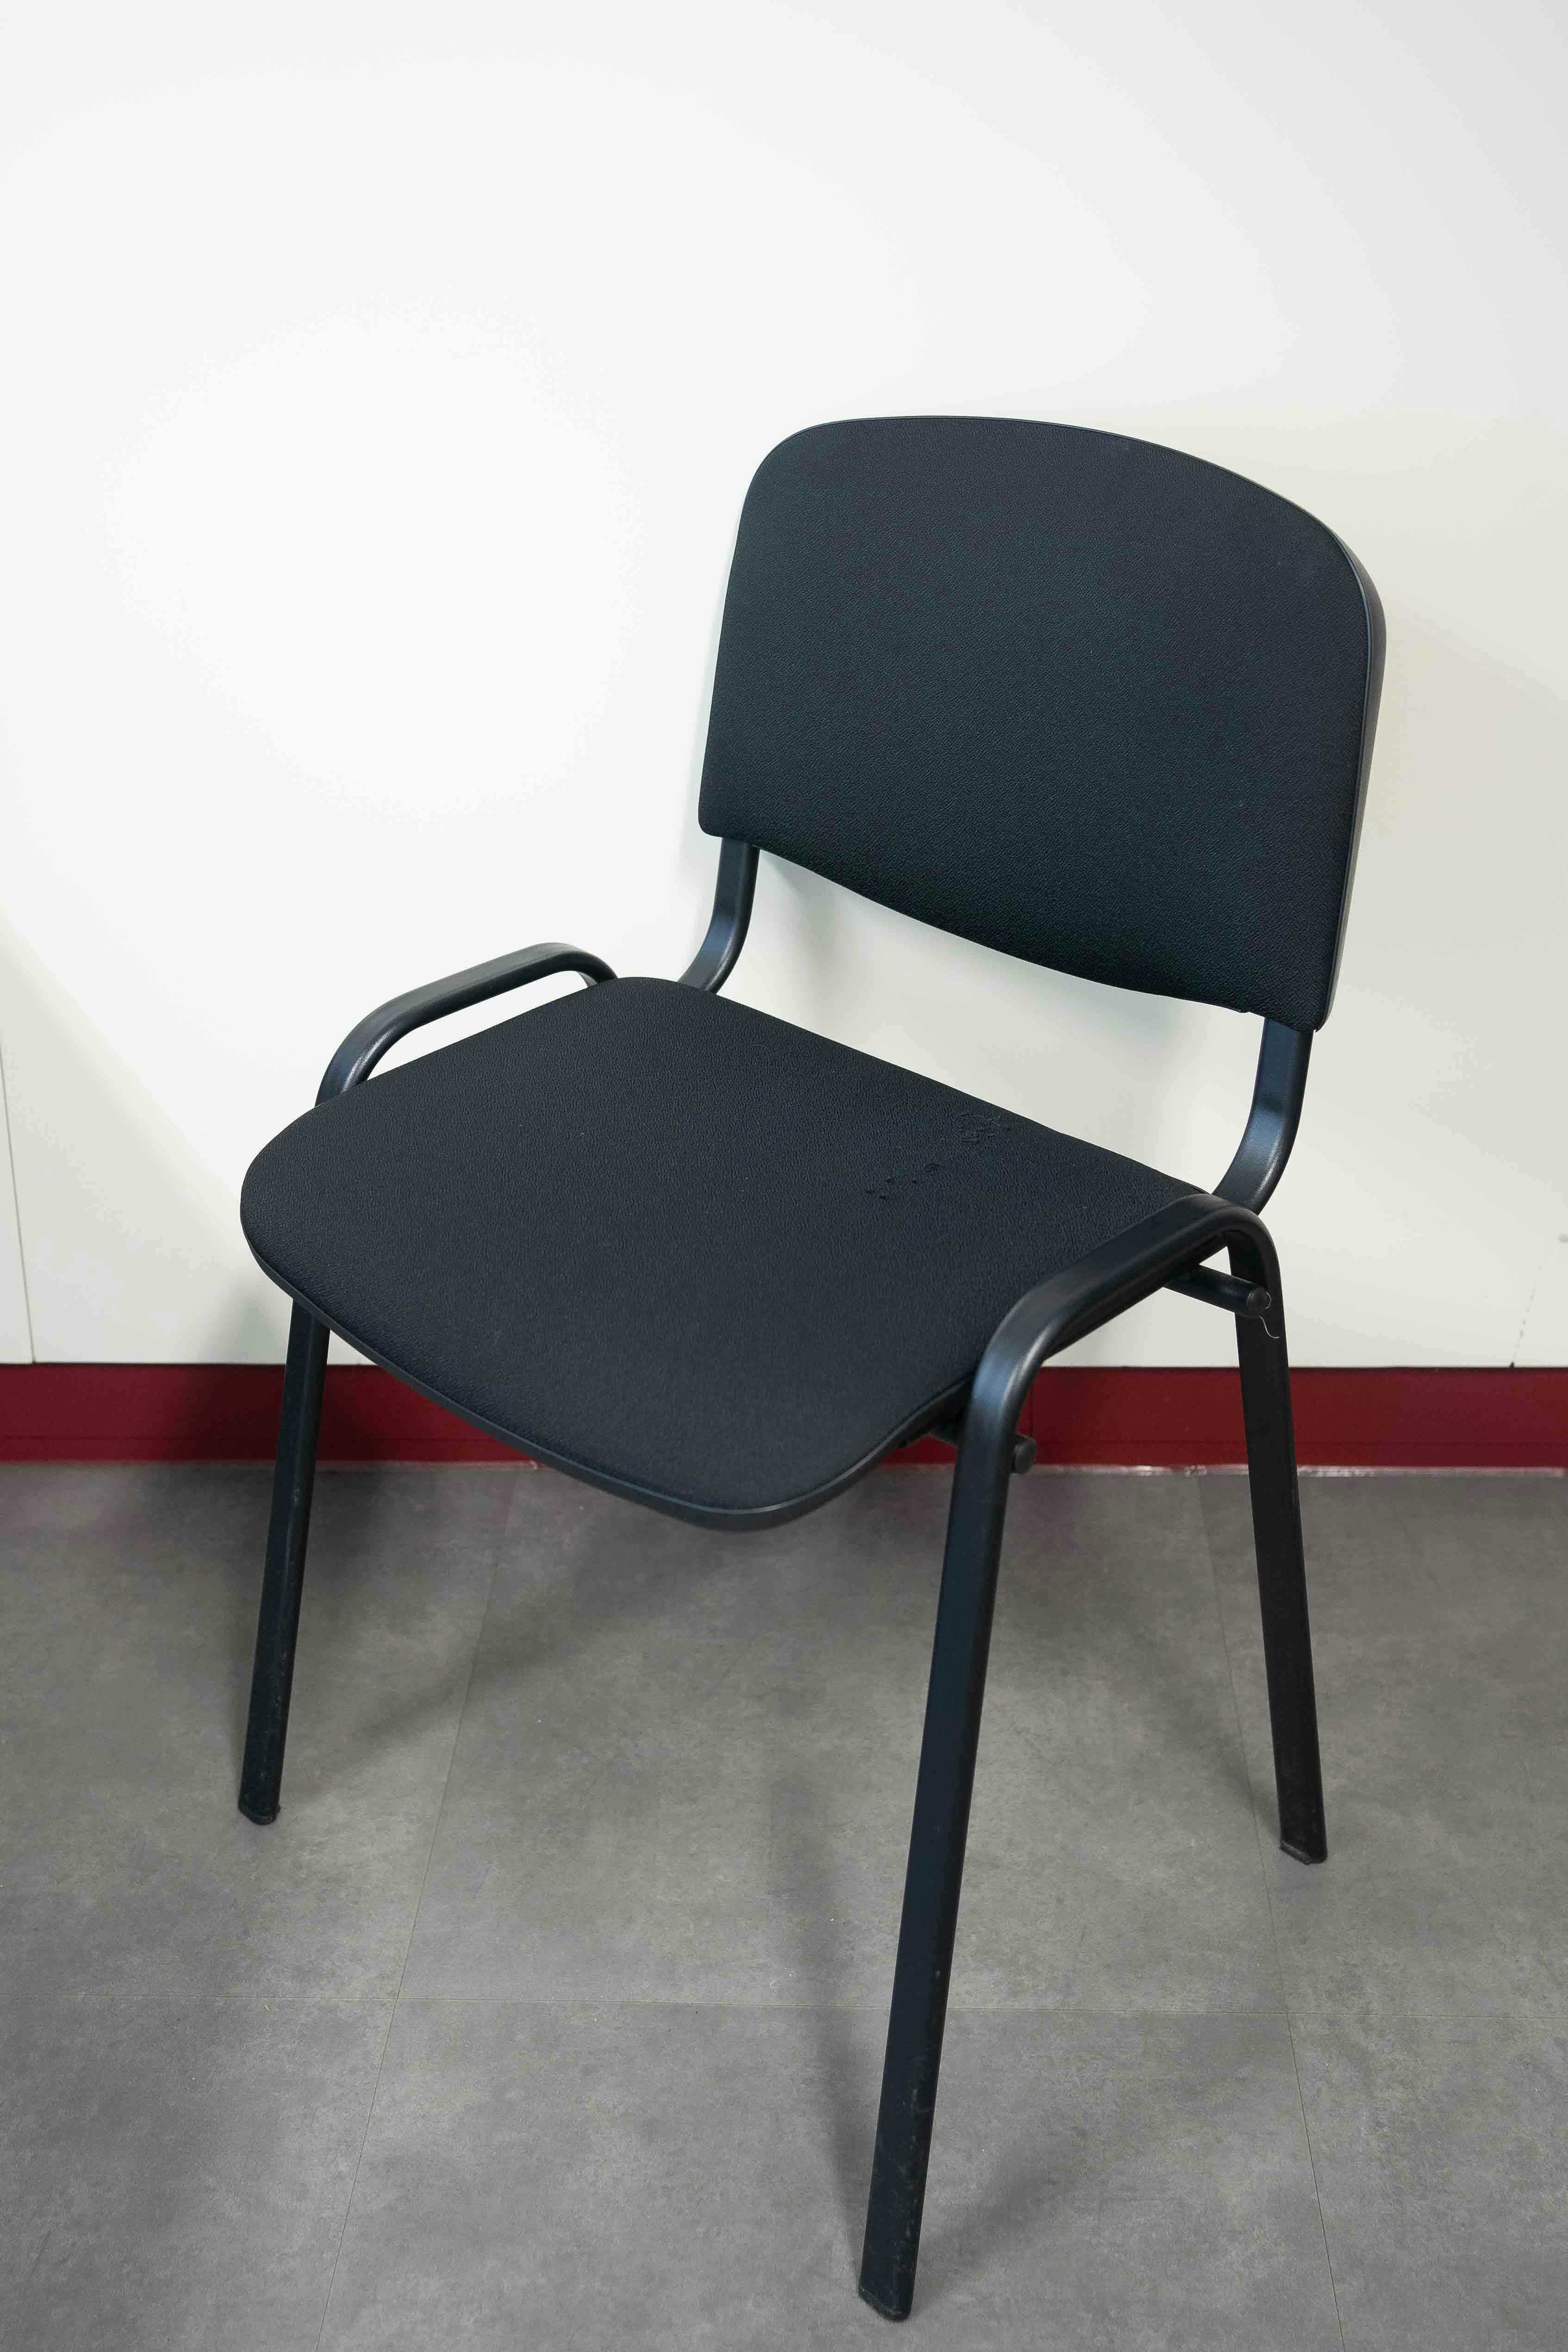 Black stackable chair with black legs - Relieve Furniture